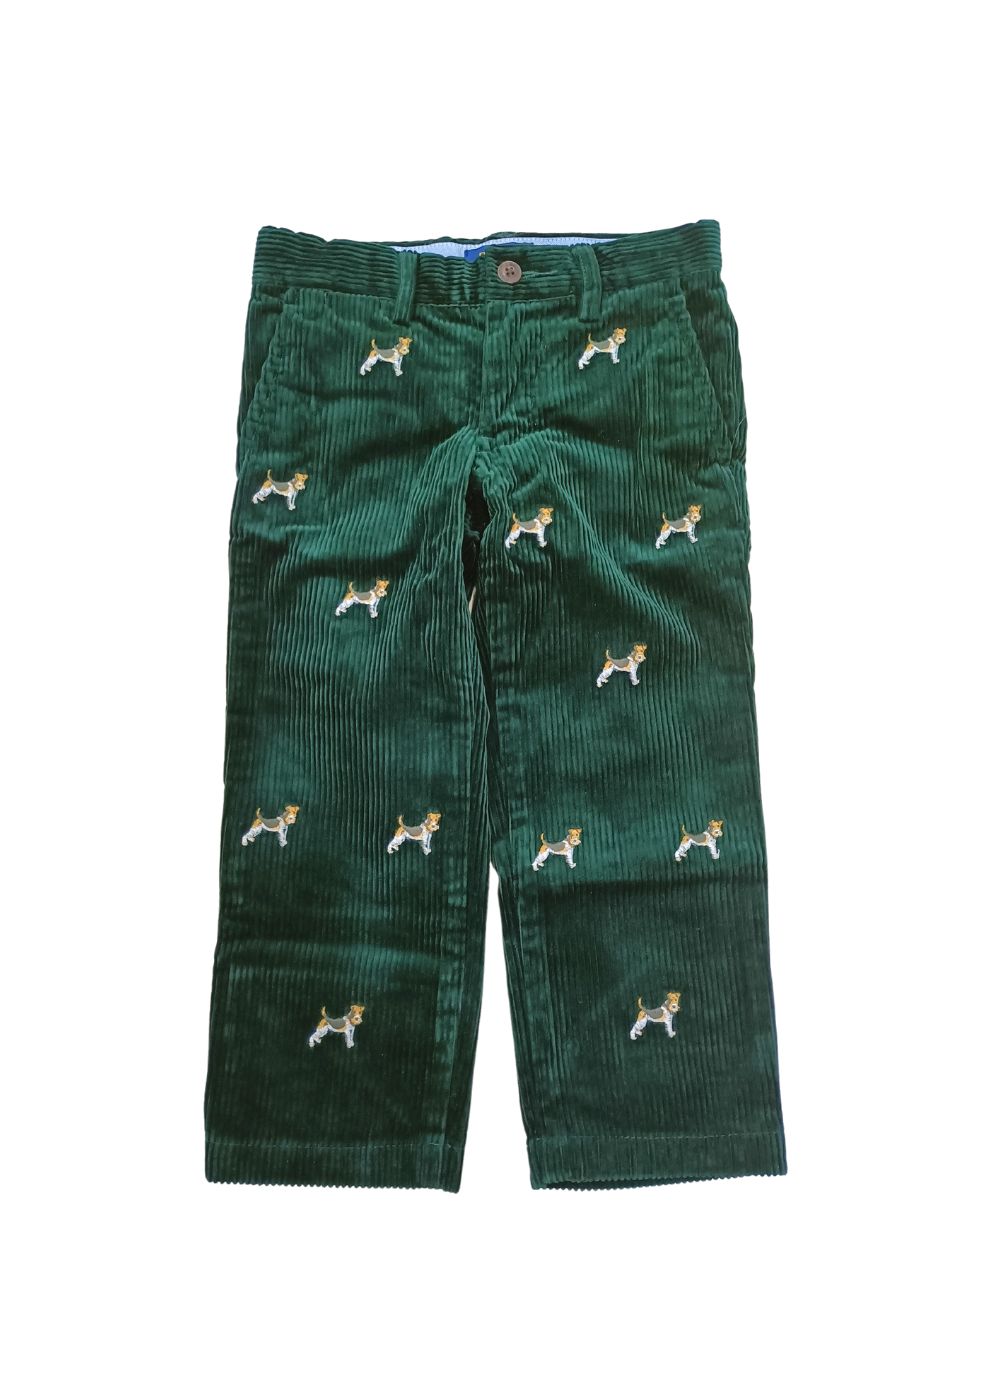 Featured image for “Polo Ralph Lauren Pantalone Verde”